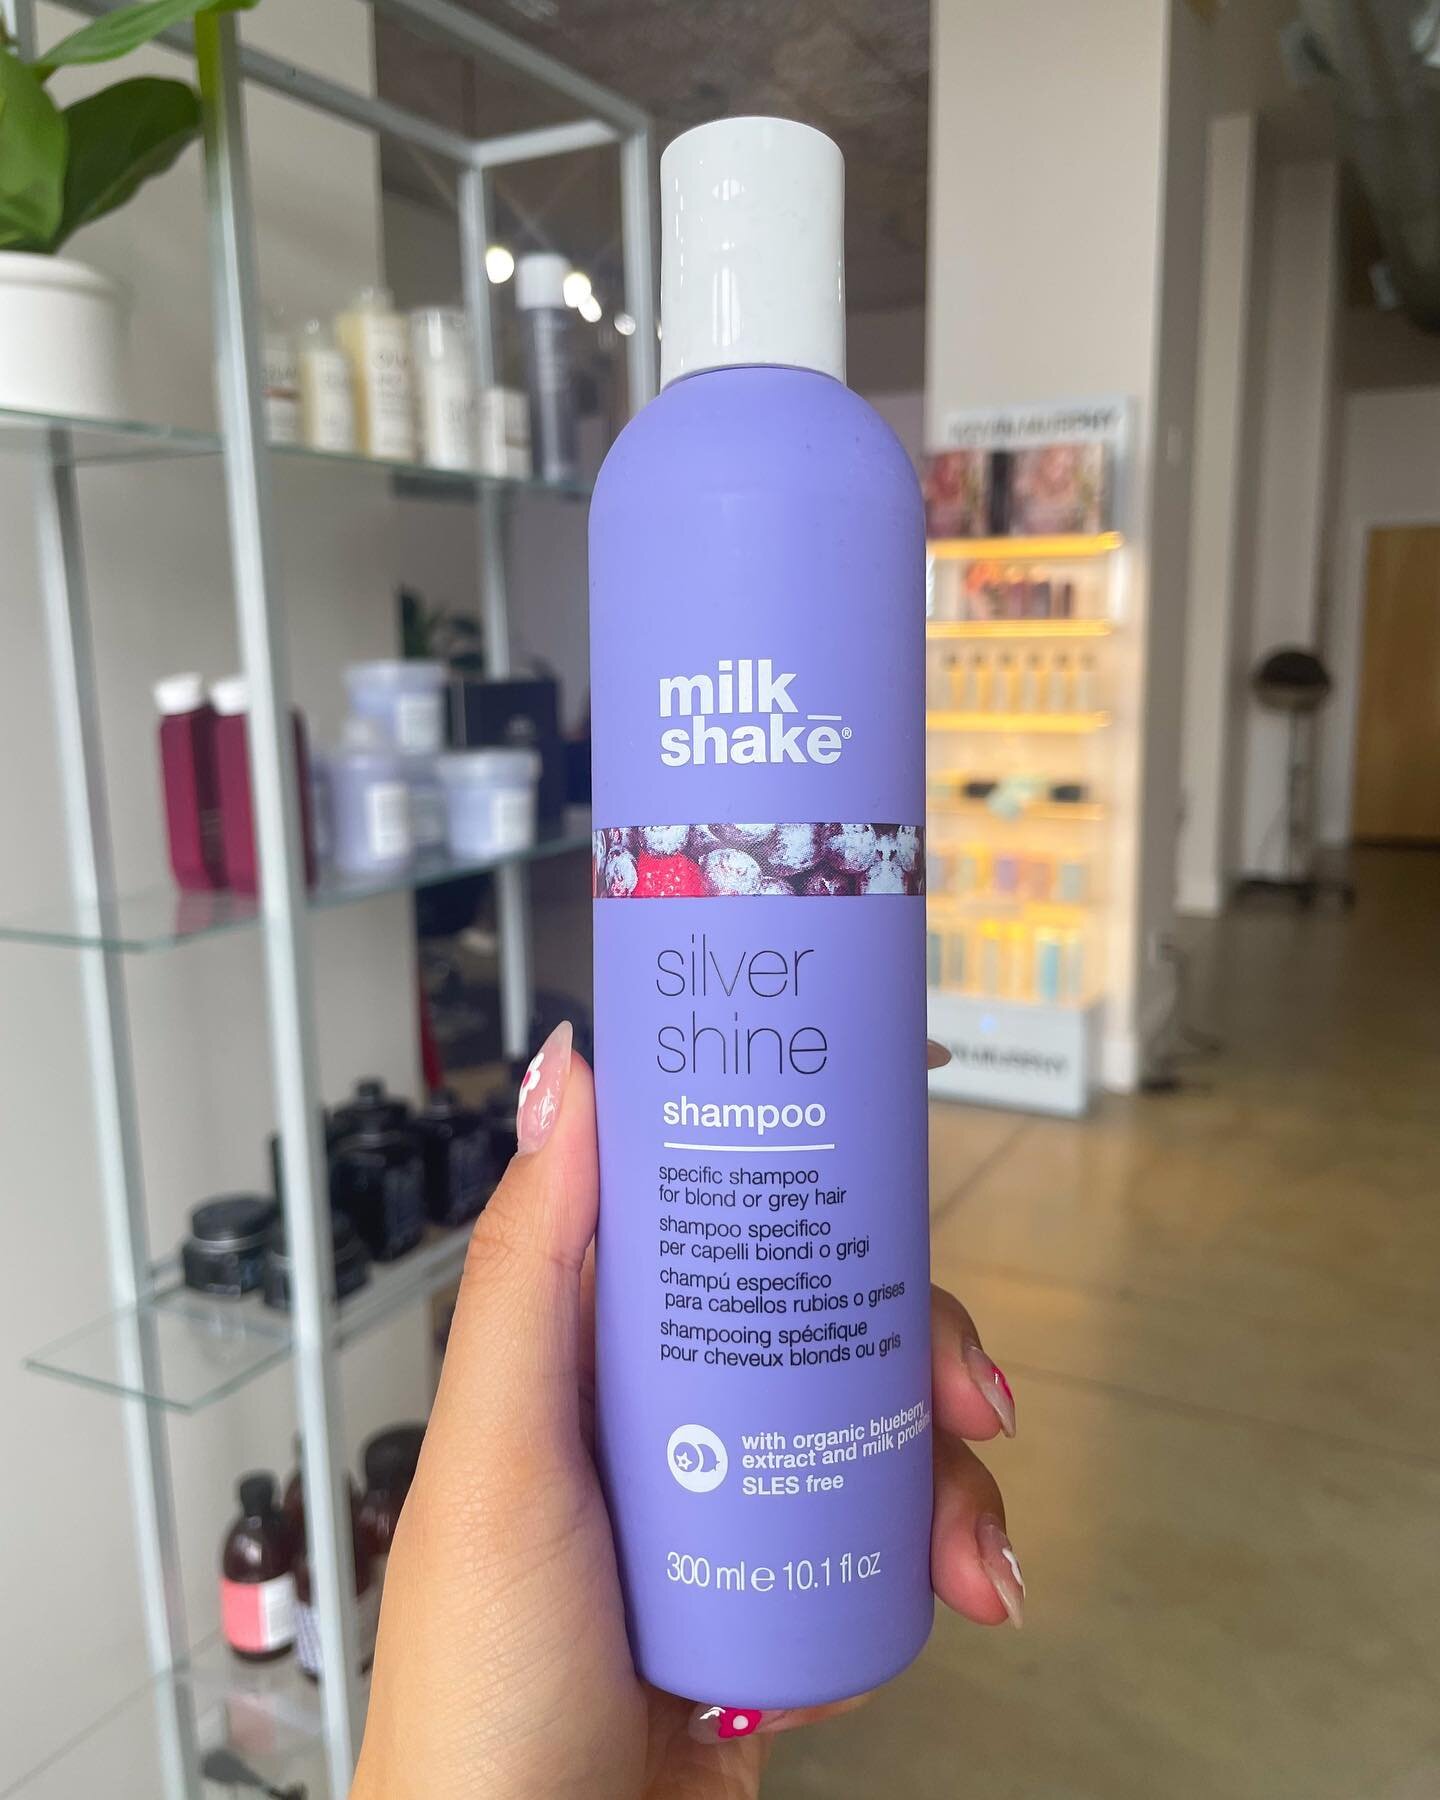 Our FAVORITE purple shampoo to help maintain your beautiful hair!🥳 This silver tone helps your hair looking fresh in between appointments by neutralizing the brass. Use once a week, for no more than 5 minutes! Retails for $22💕
.
.
.
#spokanestylist